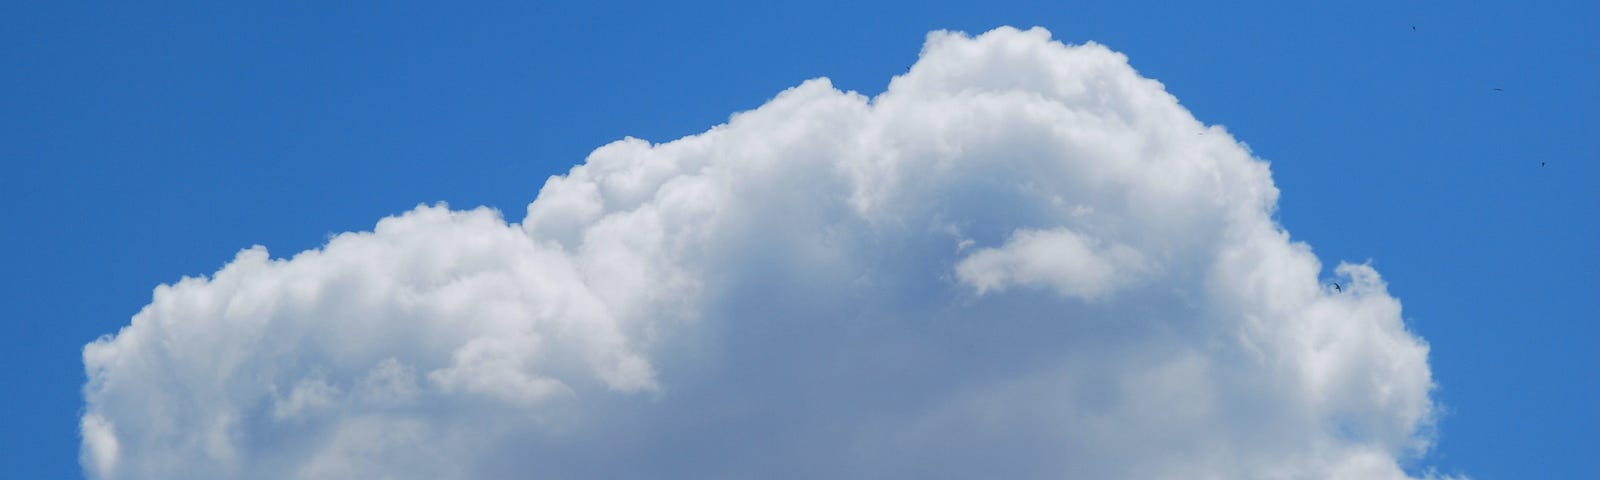 Coloured image showing a fluffy white cloud floating in a clear blue sky